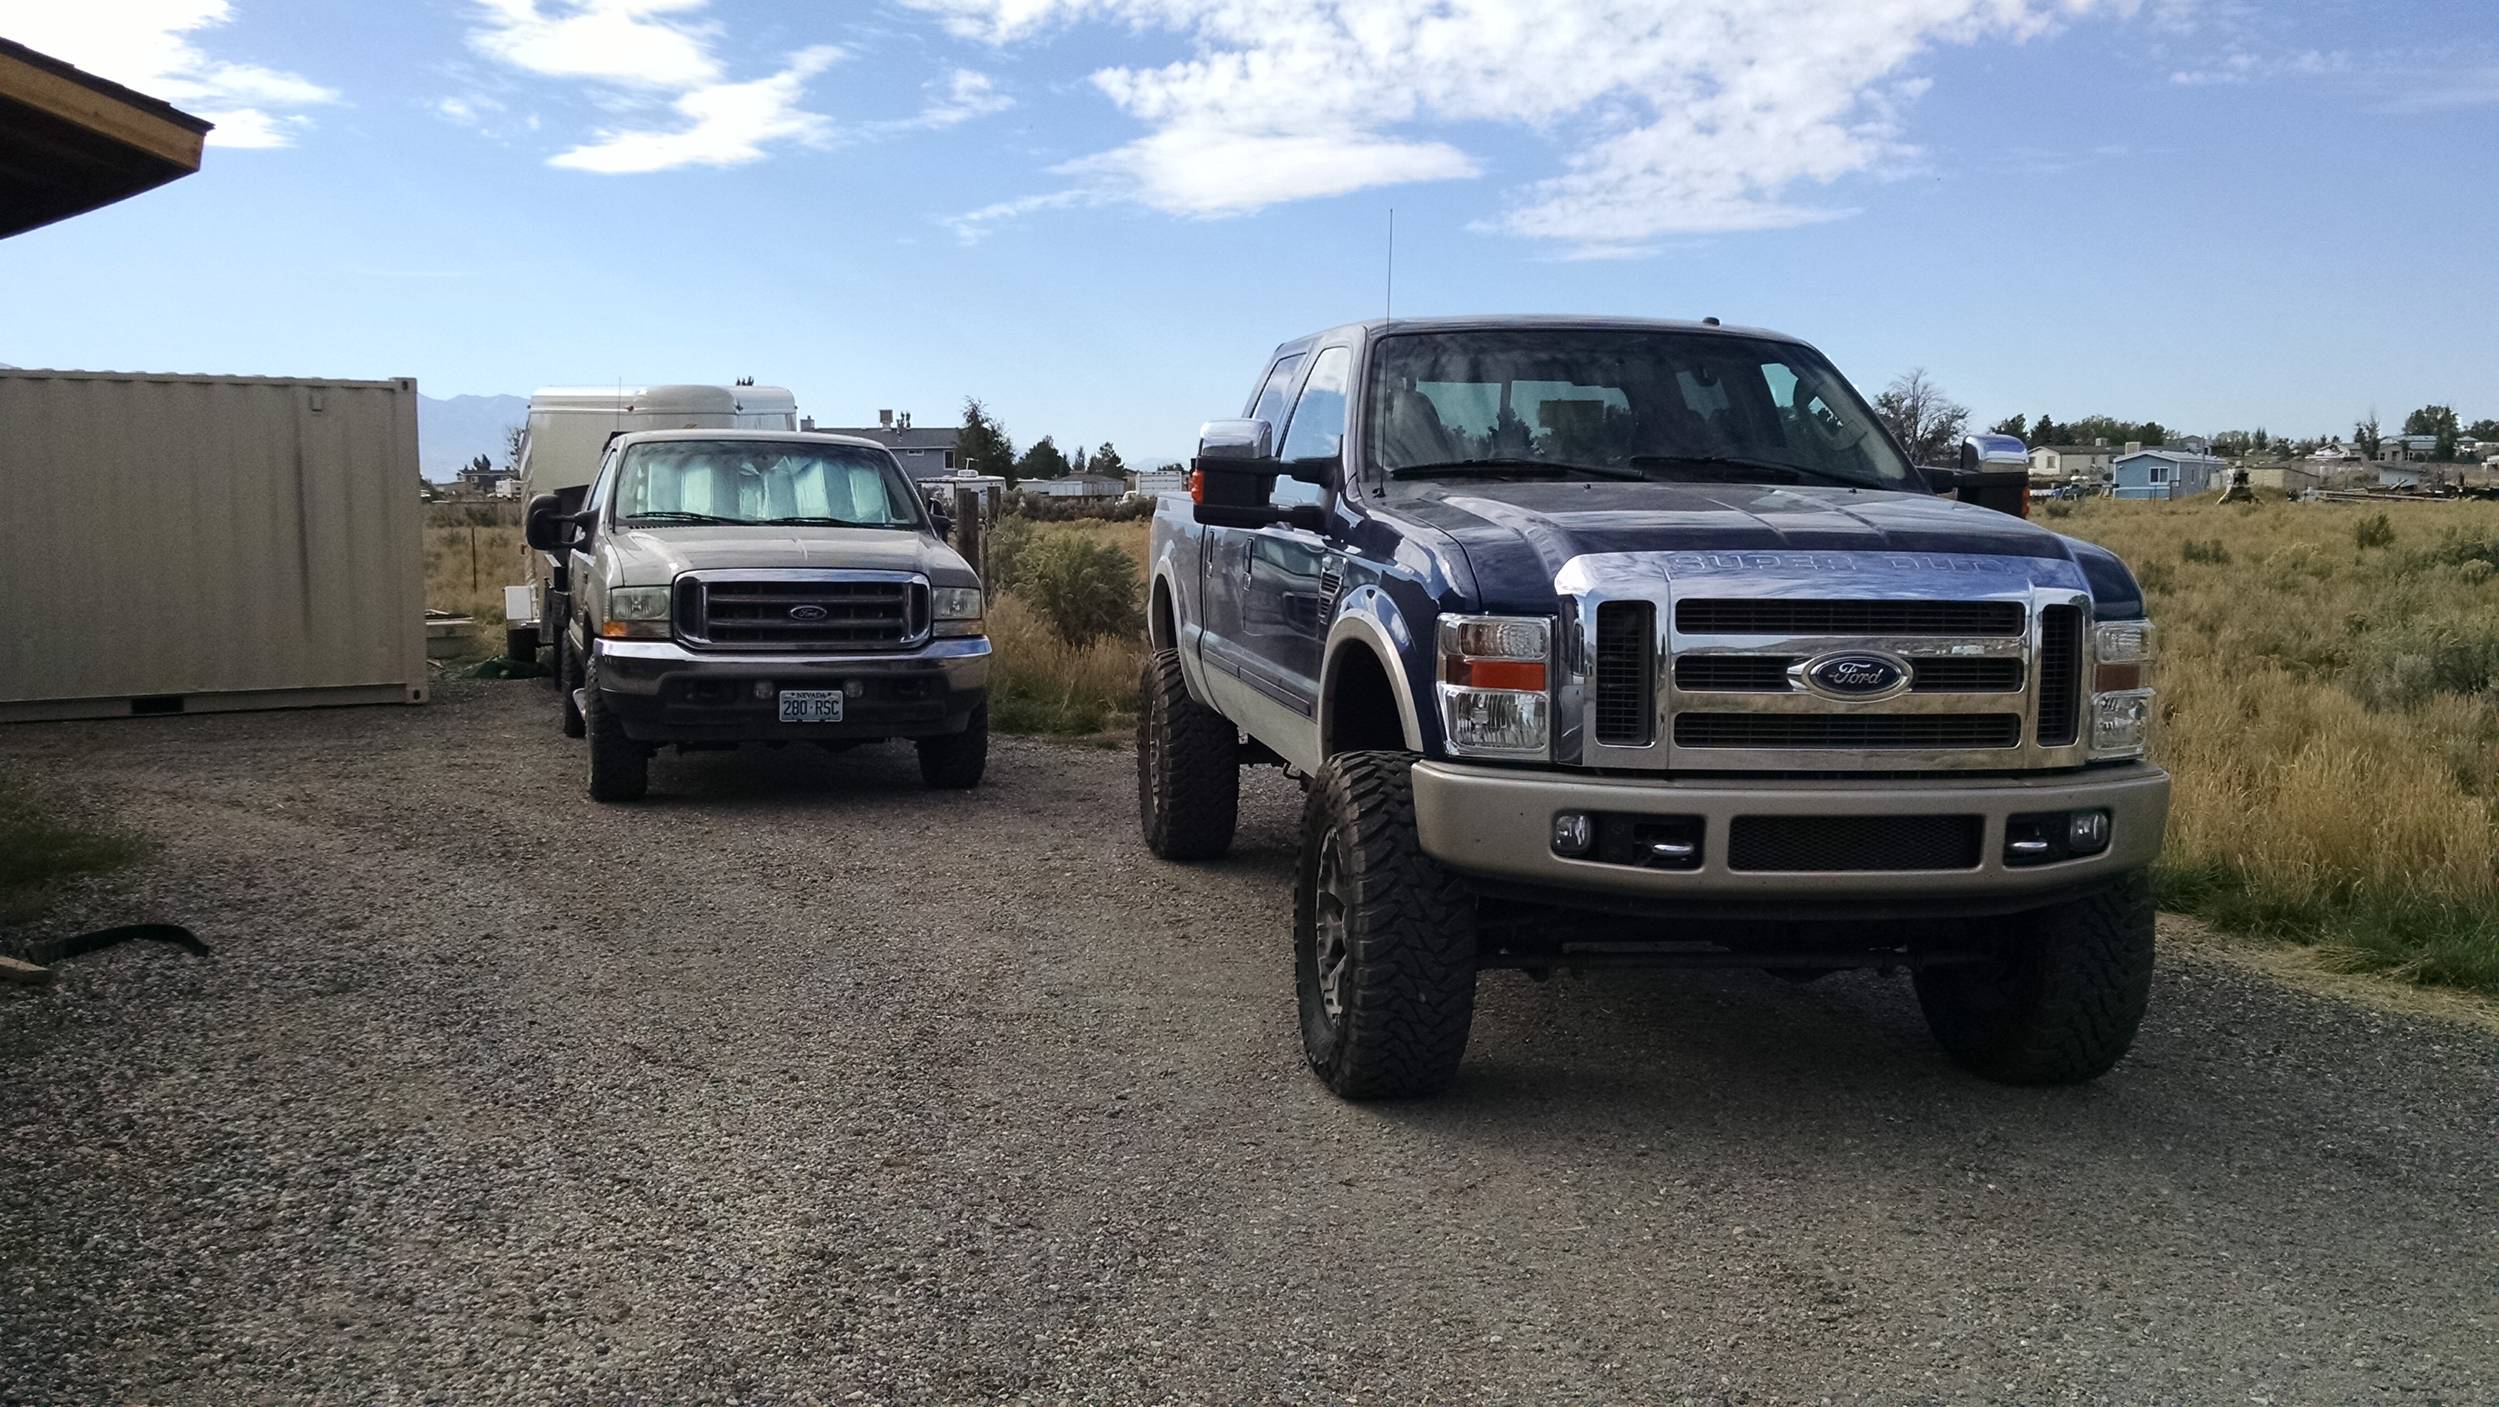 2 generations of Ford guys